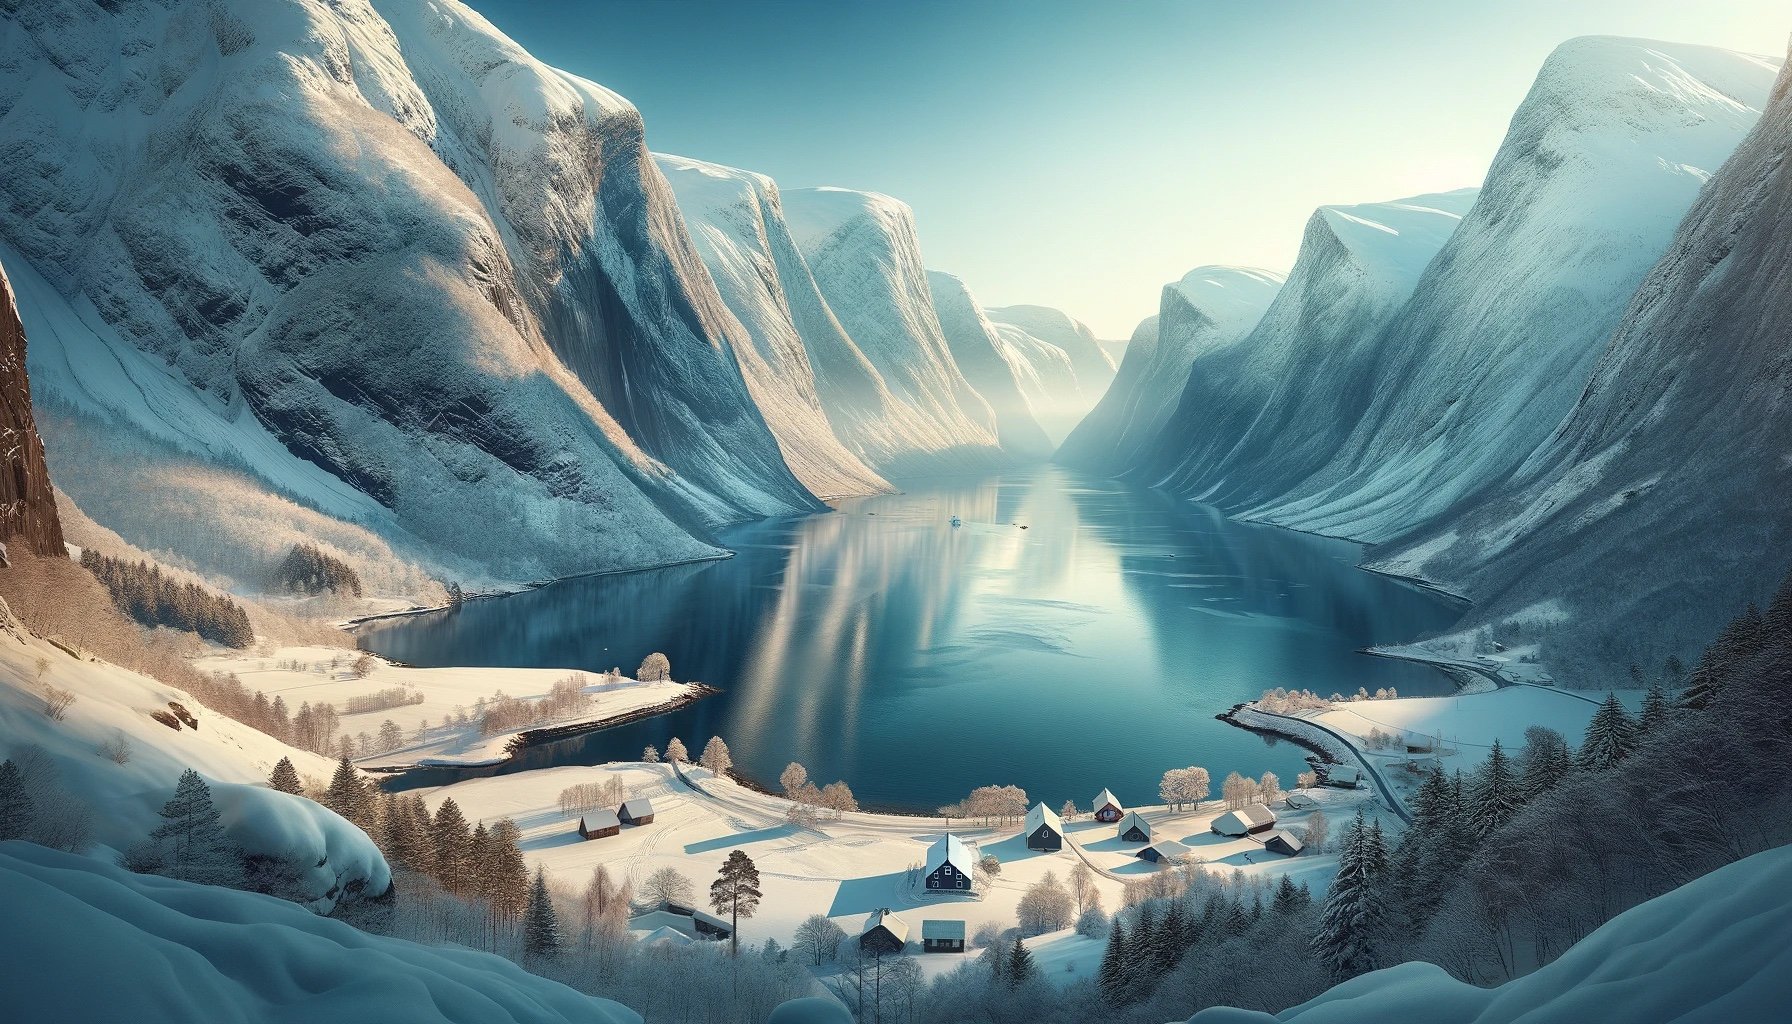 An ilustration of a Norwegian fjord in the winter. Illustration: David Nikel.